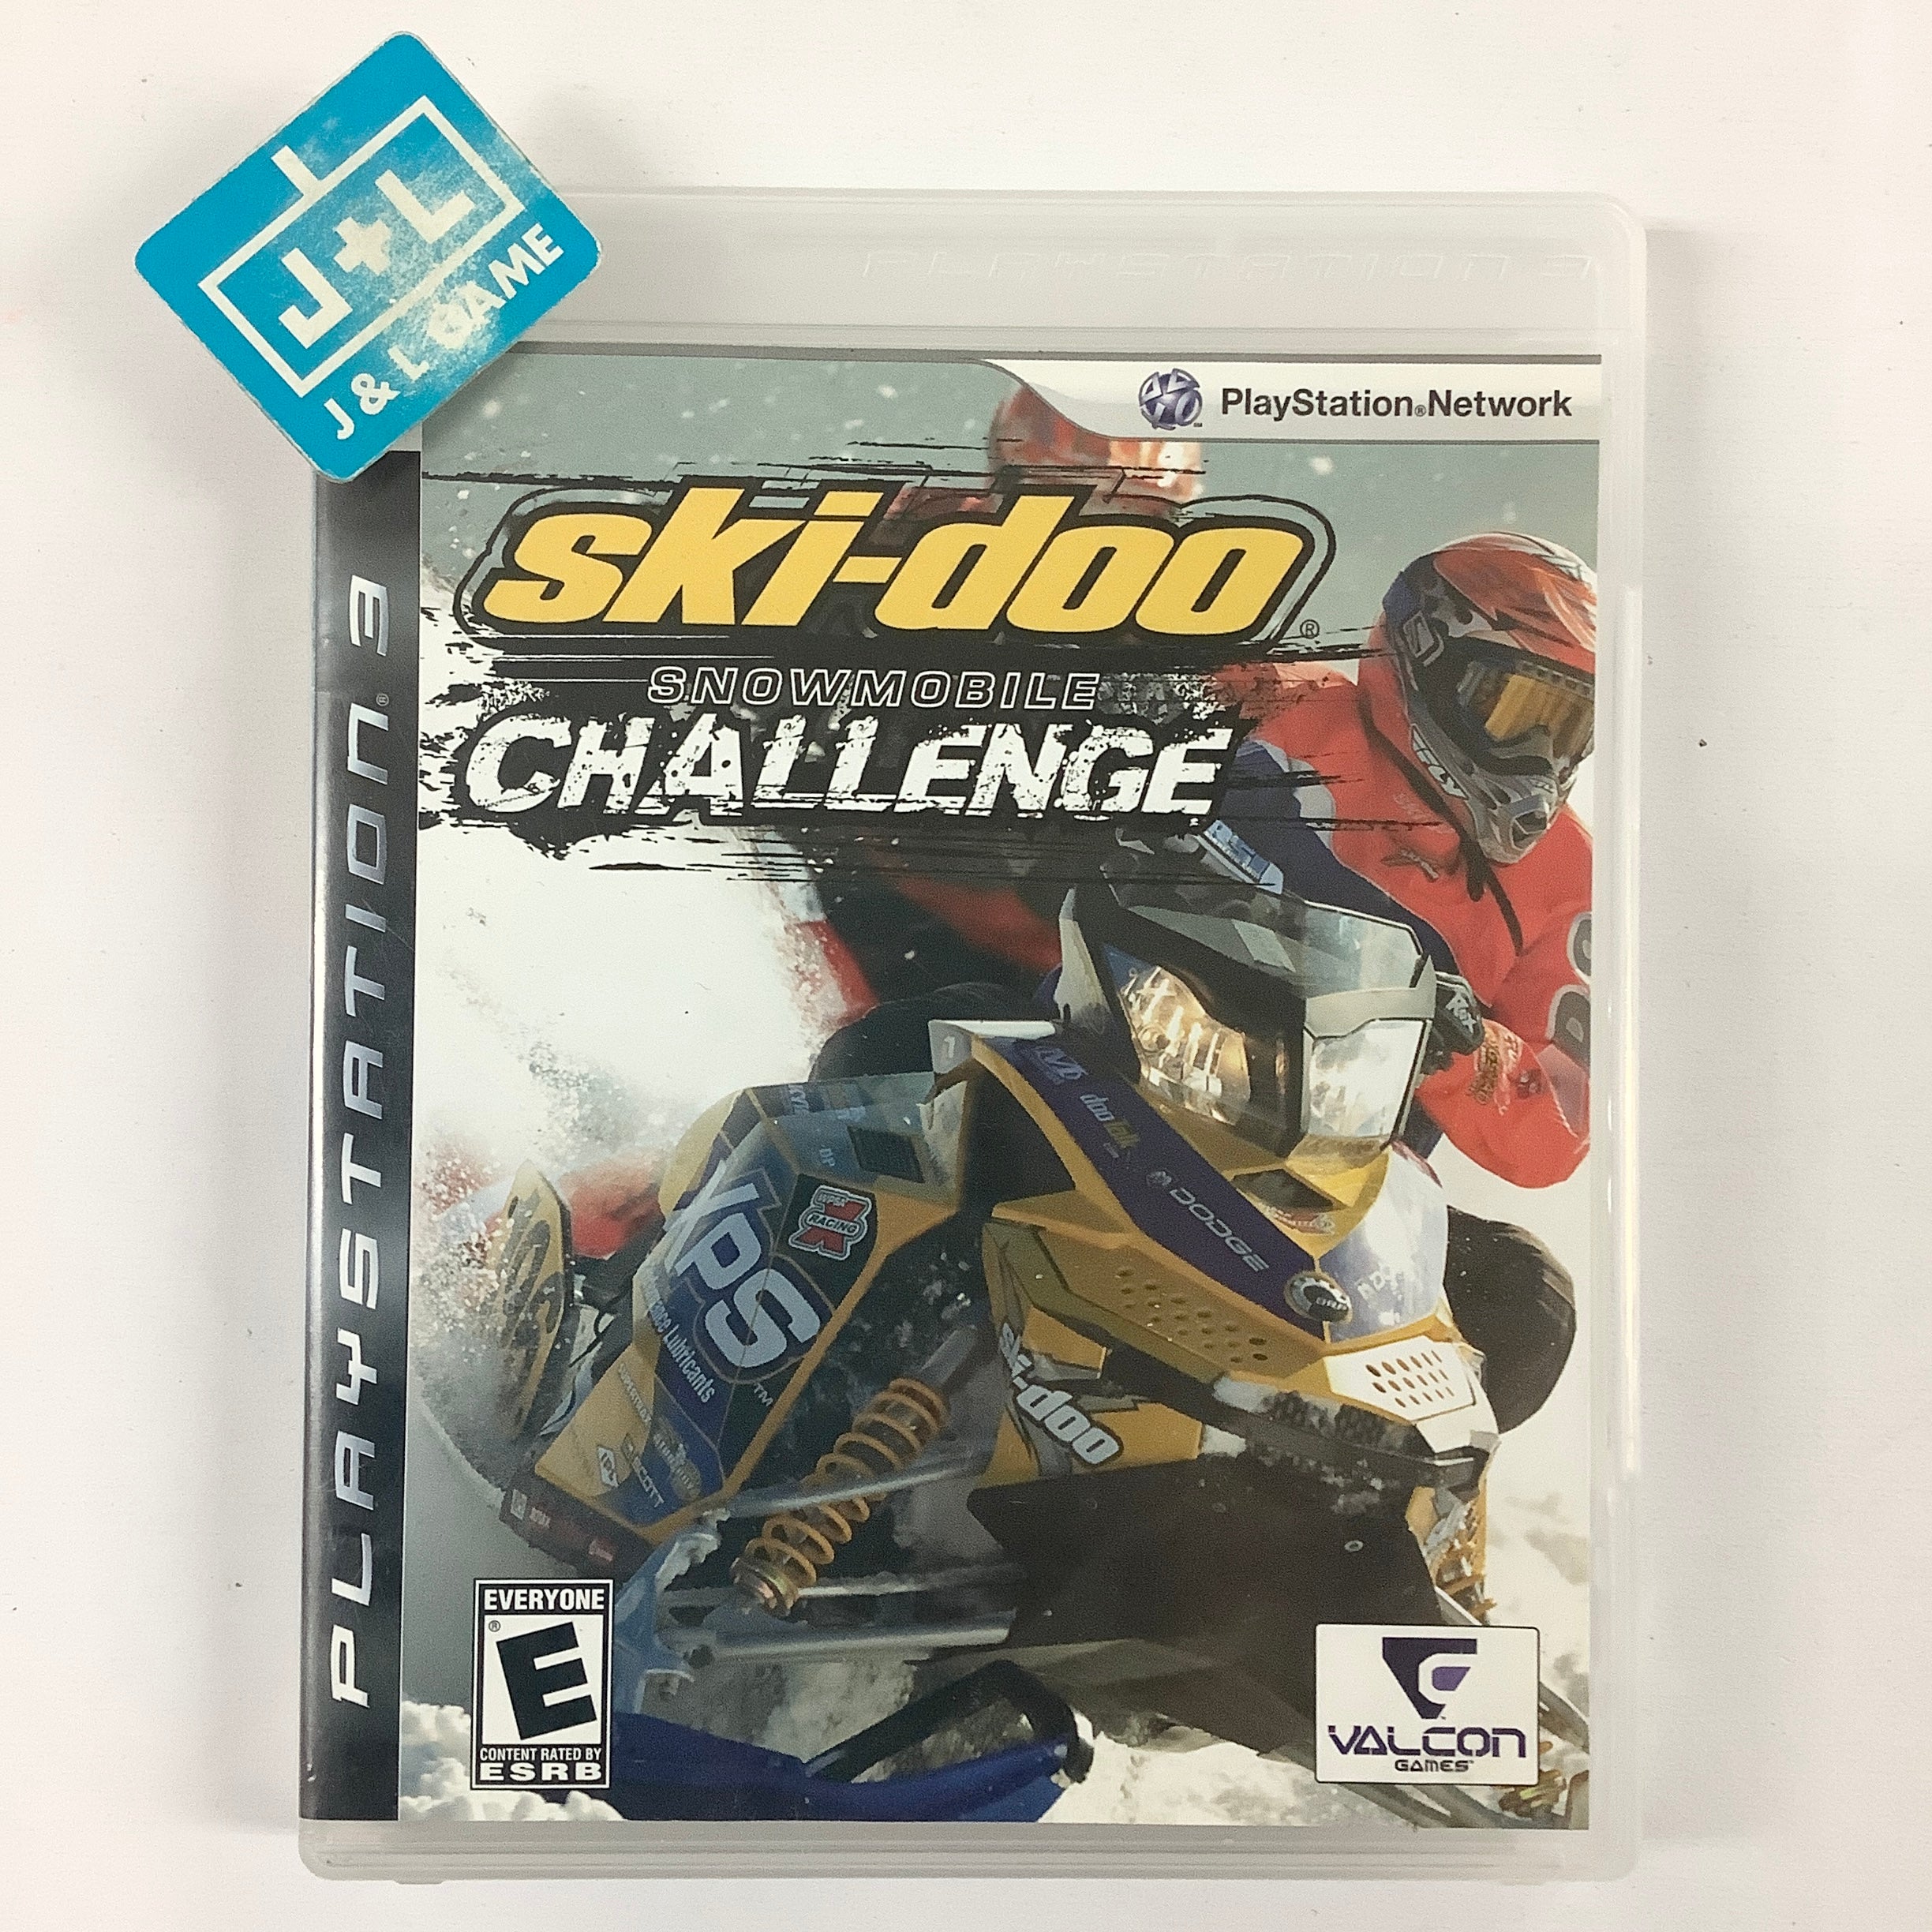 Ski Doo: Snowmobile Challenge - (PS3) PlayStation 3 [Pre-Owned] Video Games Valcon Games   